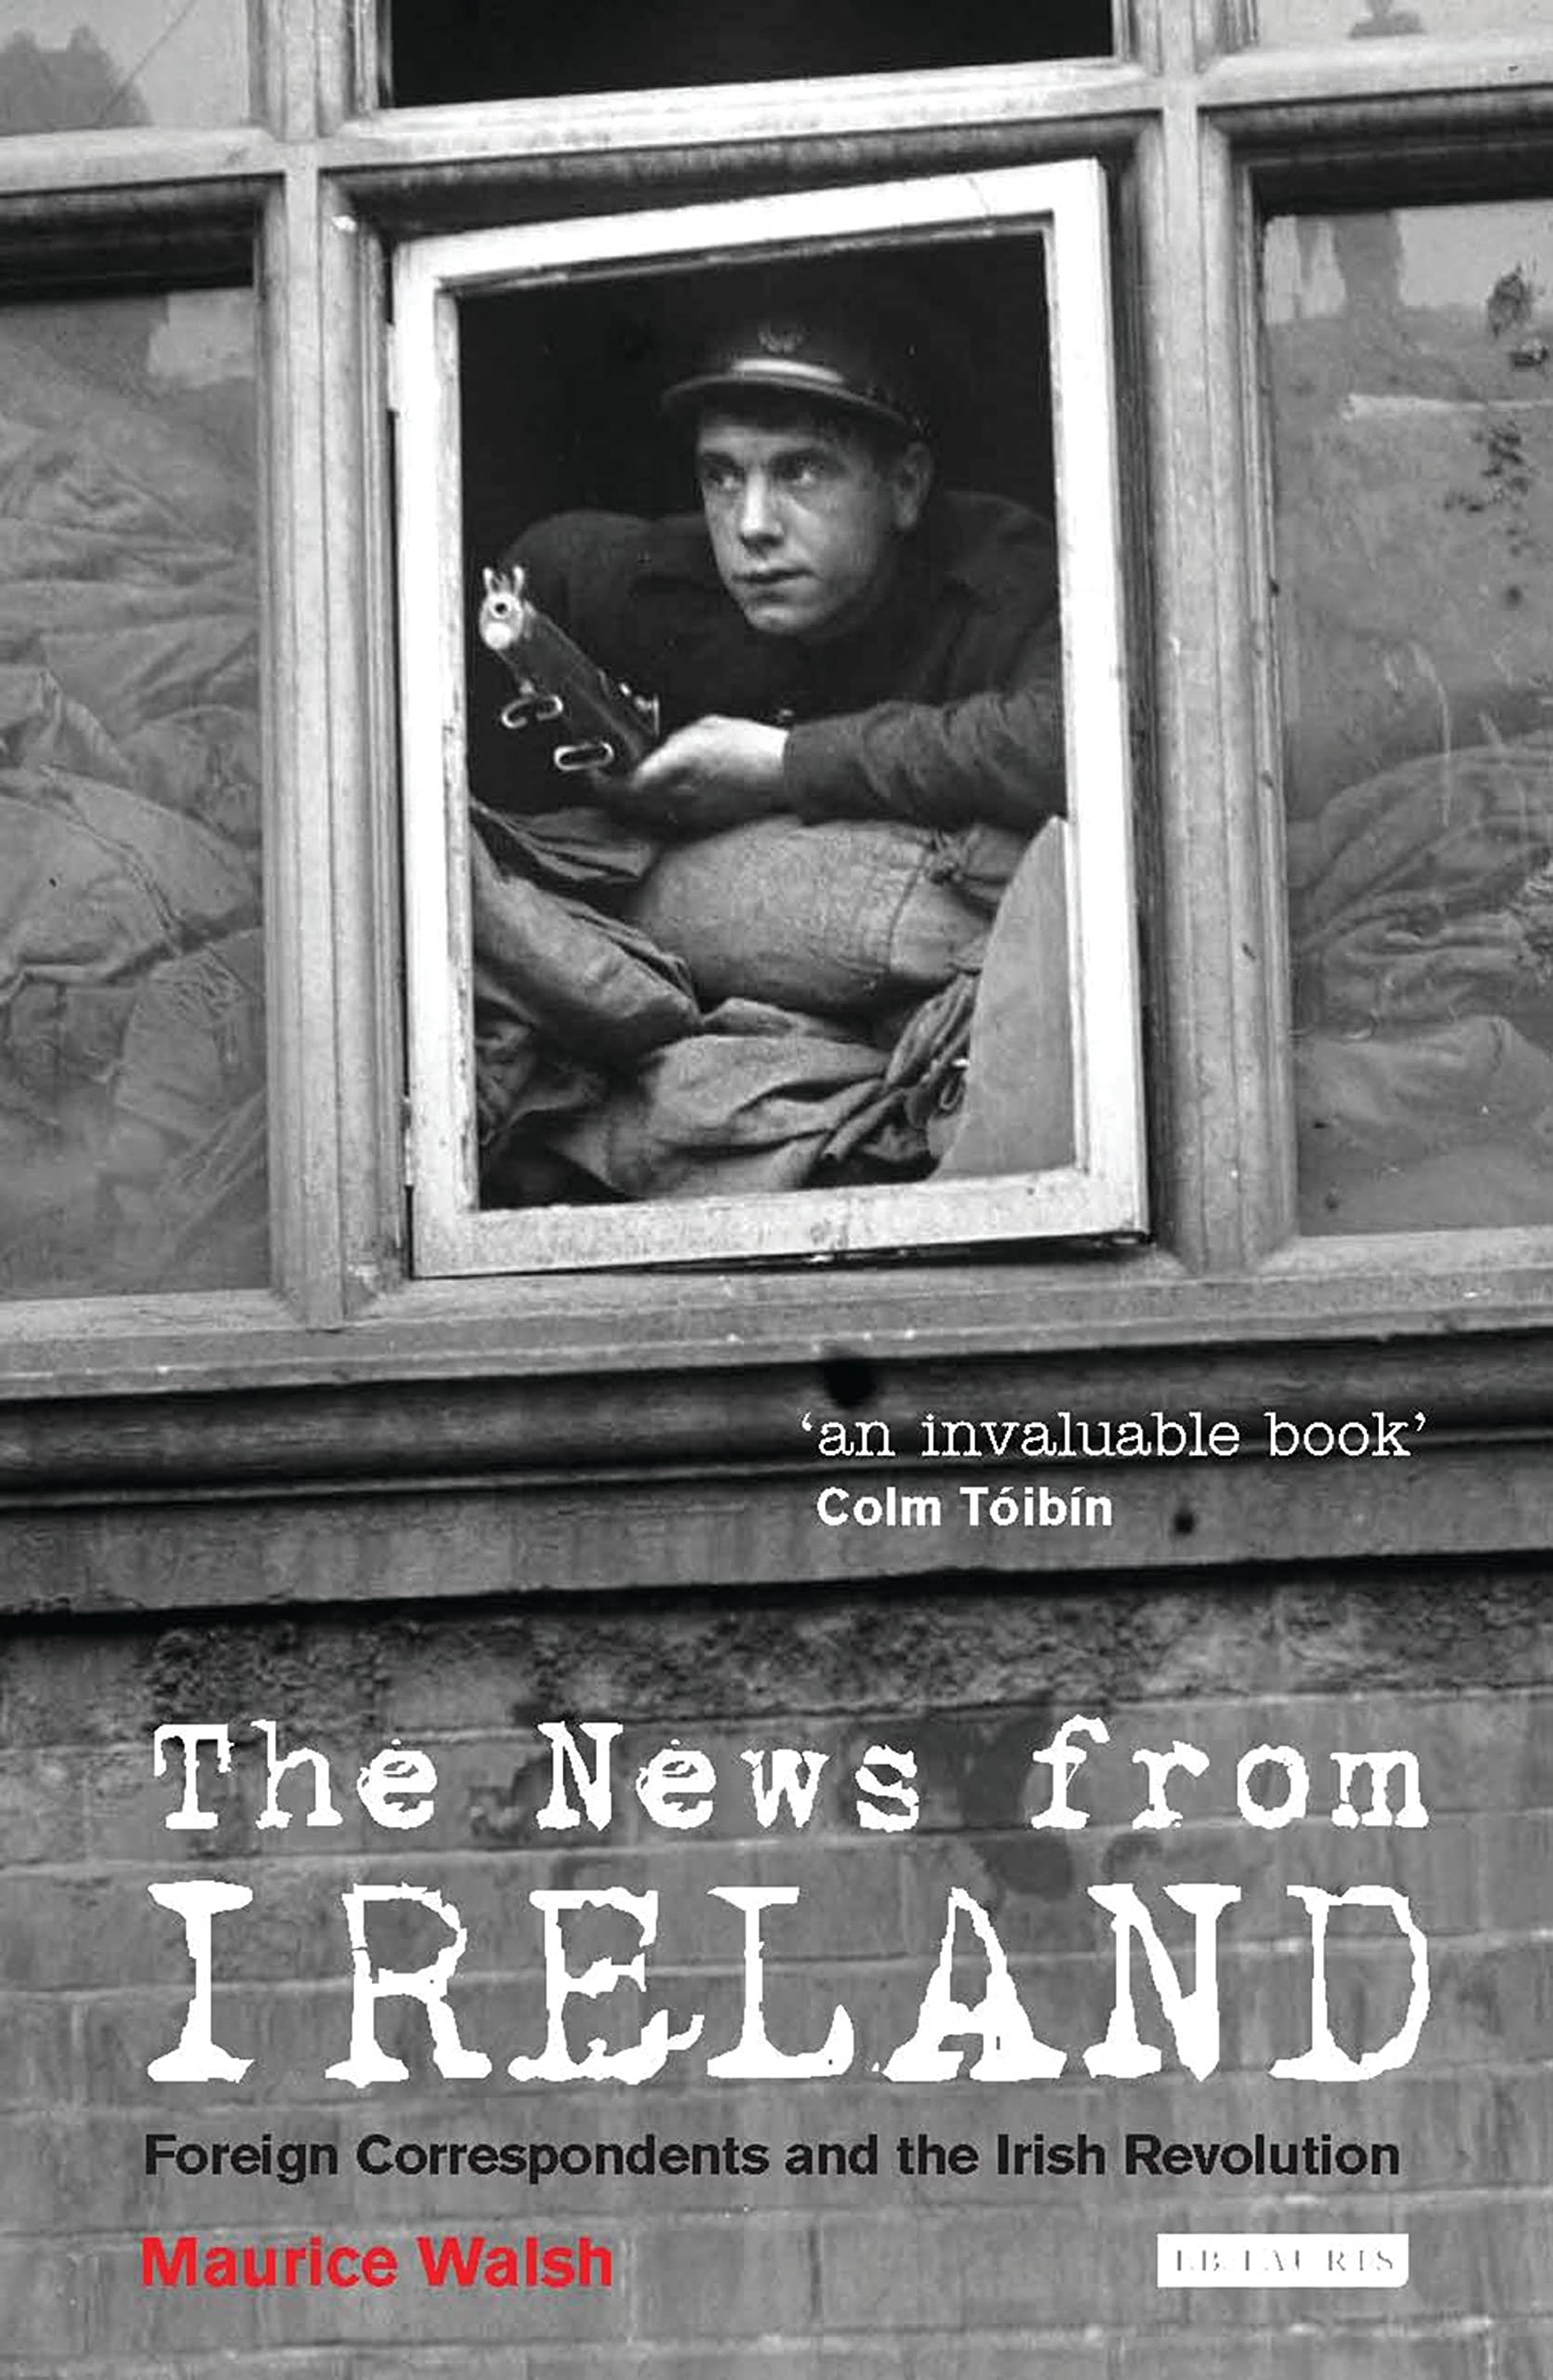 The News from Ireland: Foreign Correspondents and the Irish Revolution by Maurice Walsh.